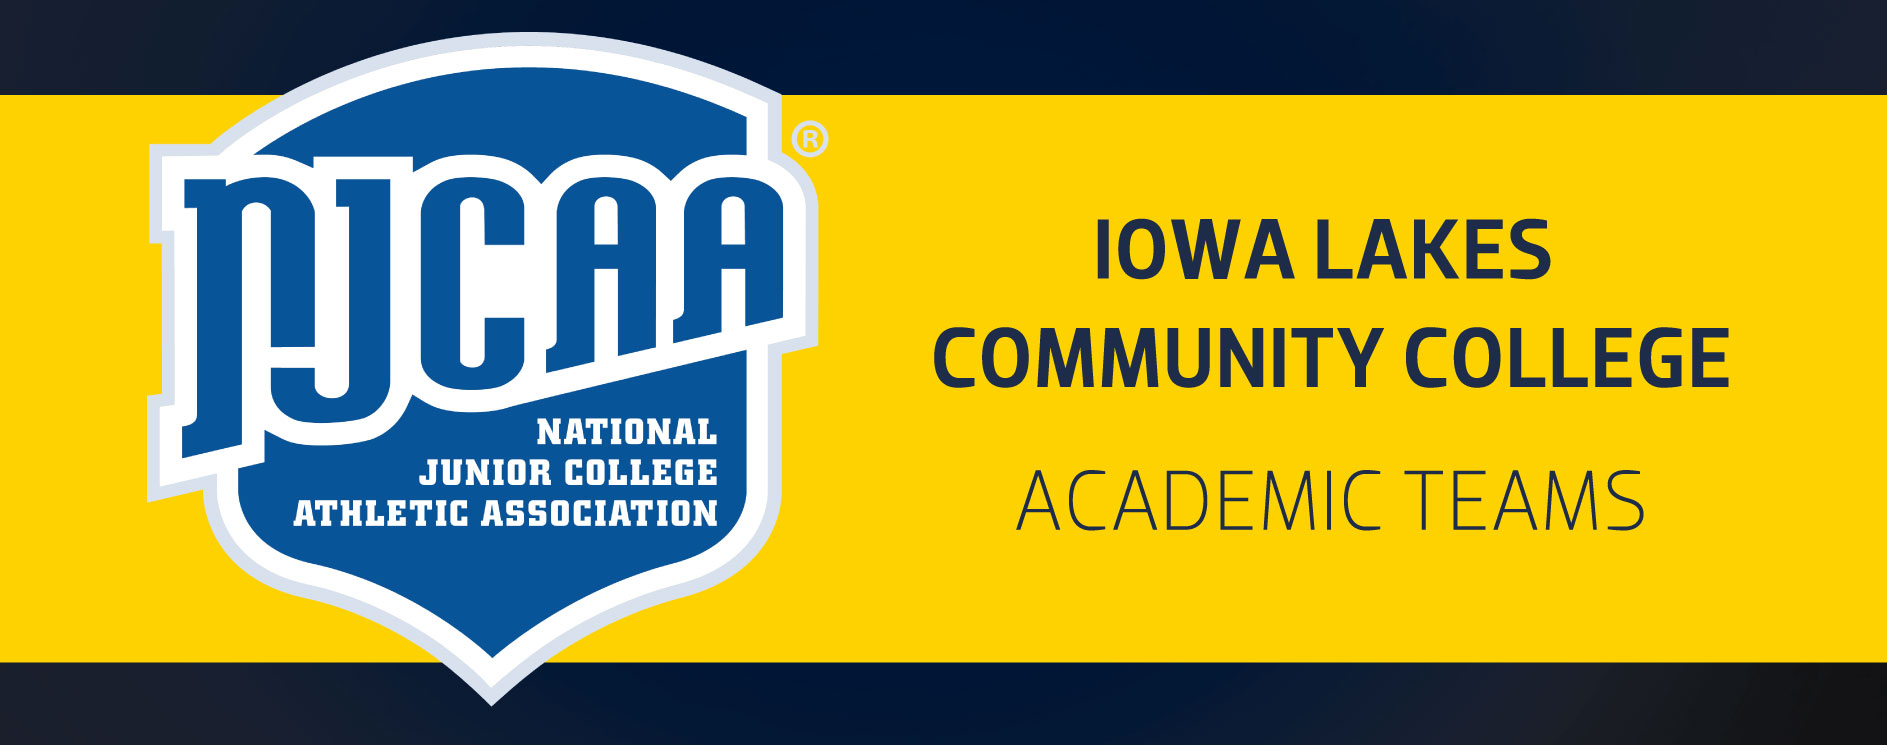 Iowa Lakes Teams & Student Athletes Earn Academic Recognition